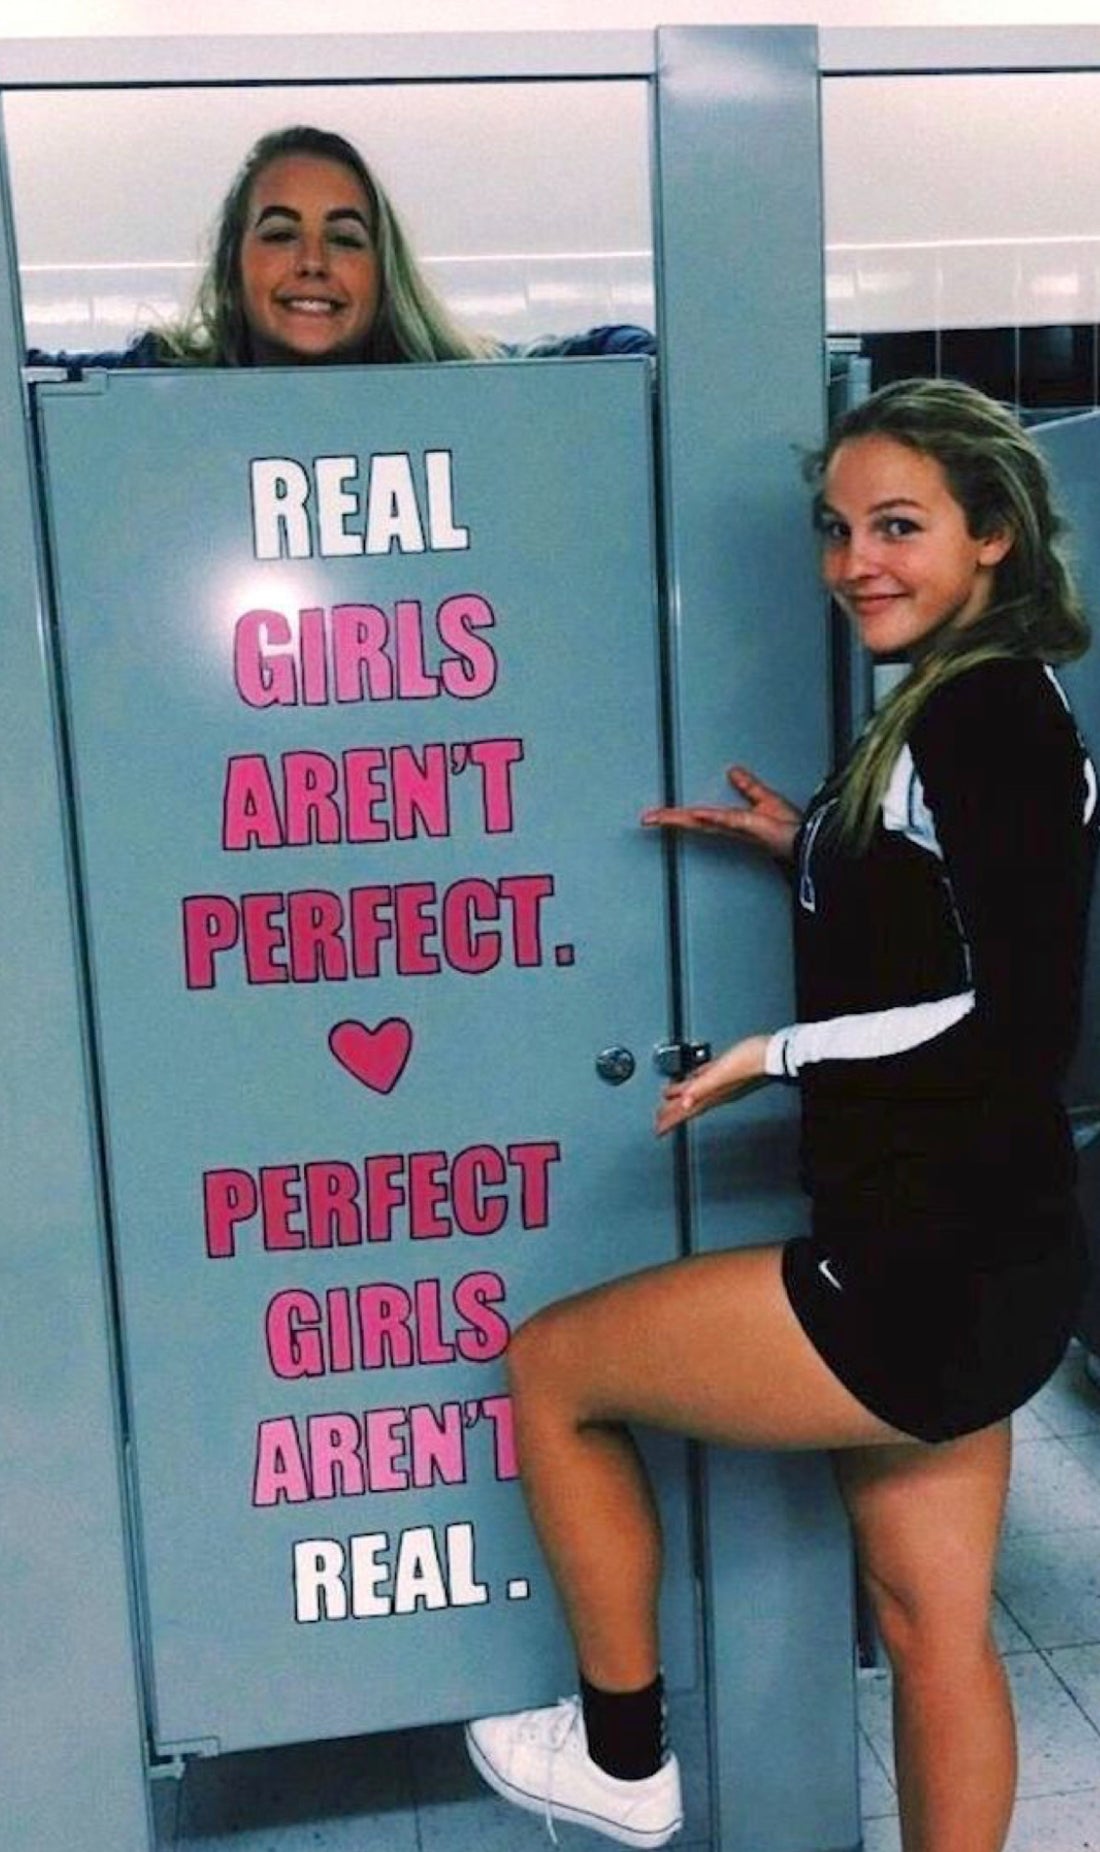 Real girls aren’t perfect.